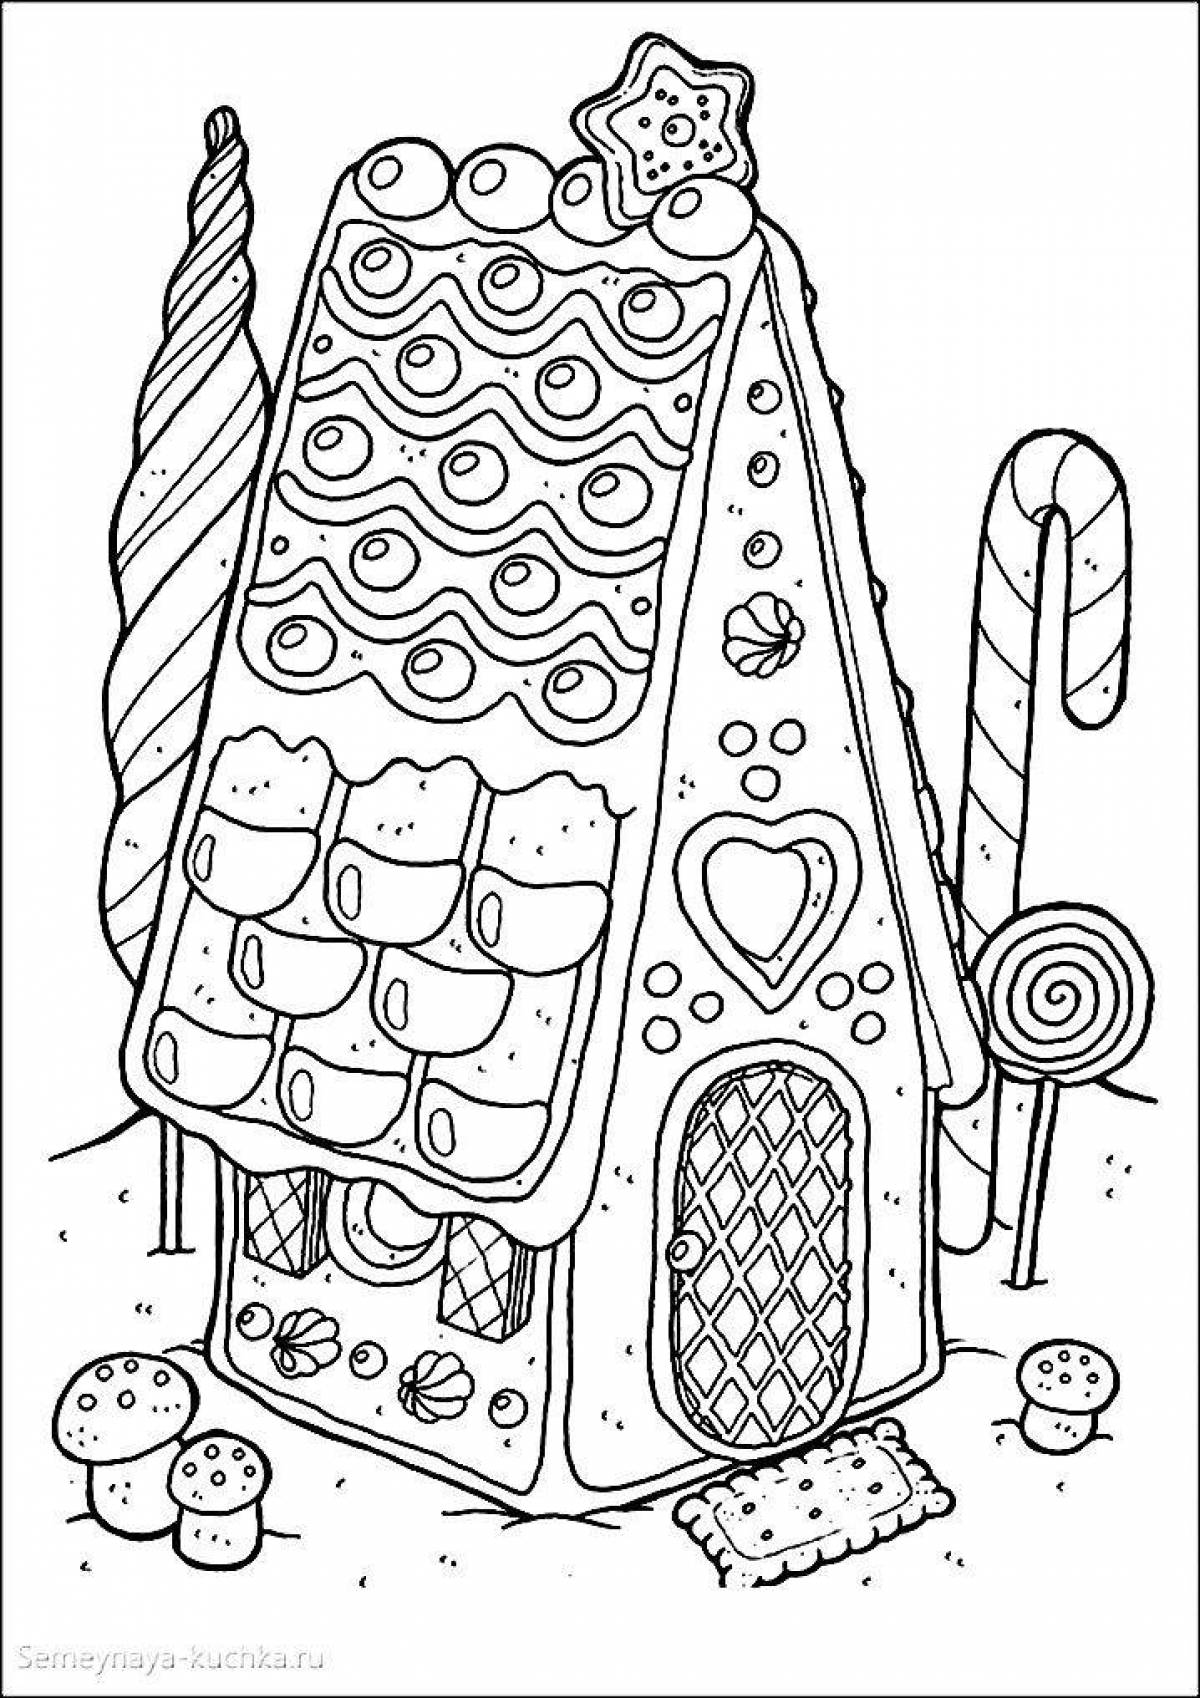 Coloring page unusual gingerbread house